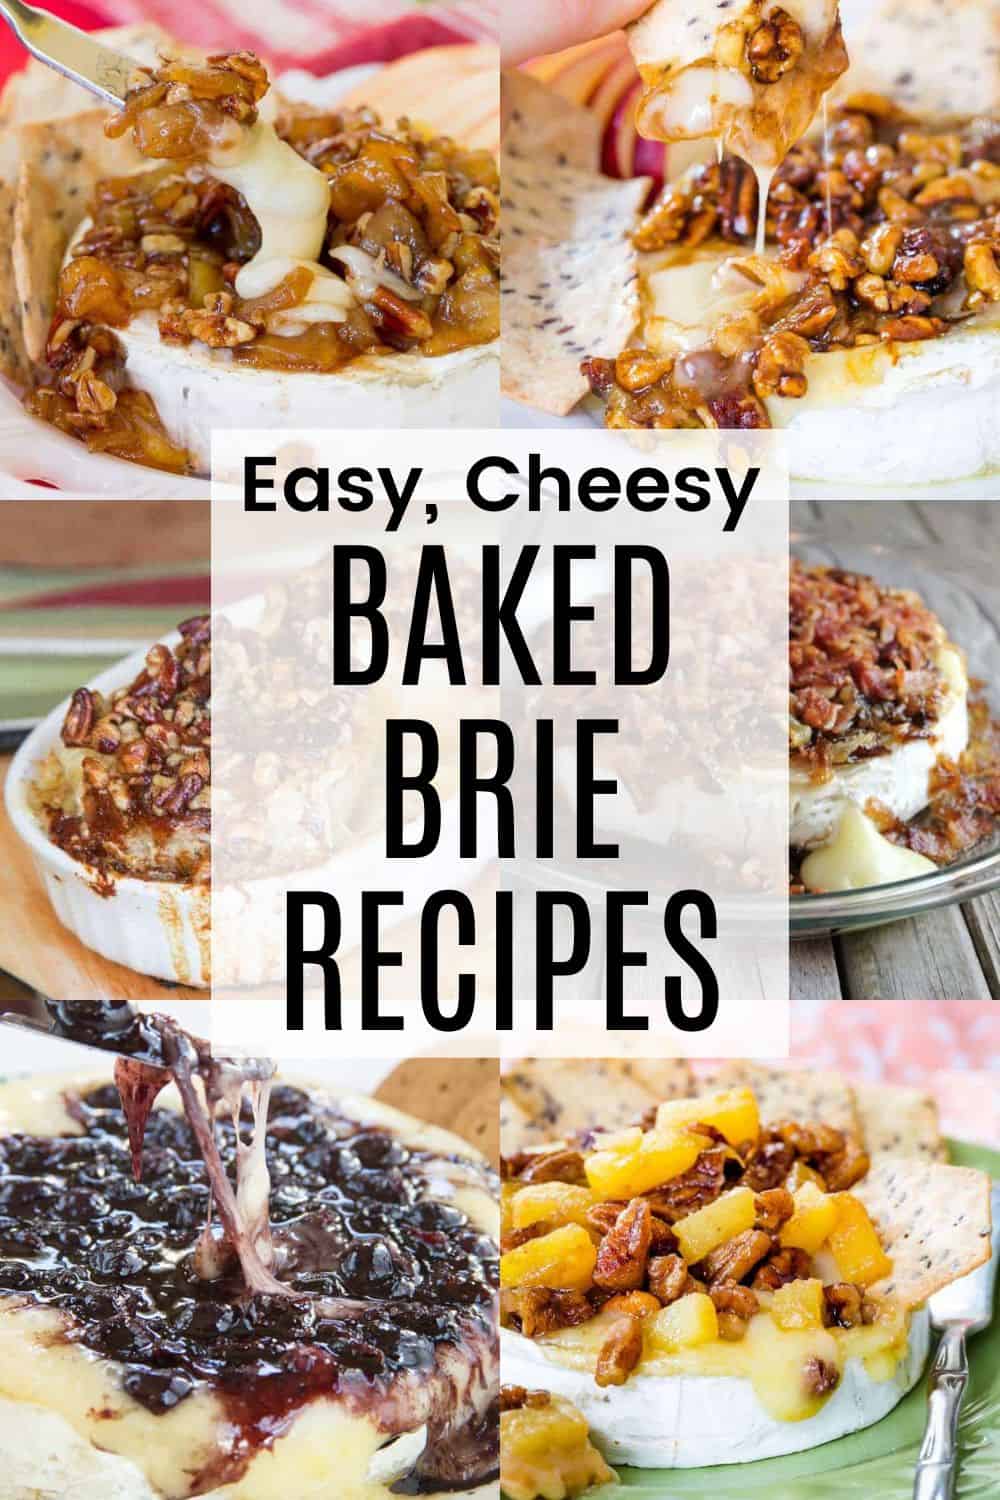 A collage of six different versions of Baked Brie with a semi-transparent white box in the middle with black text overlay that says "Easy, Cheesy Baked Brie Recipes".